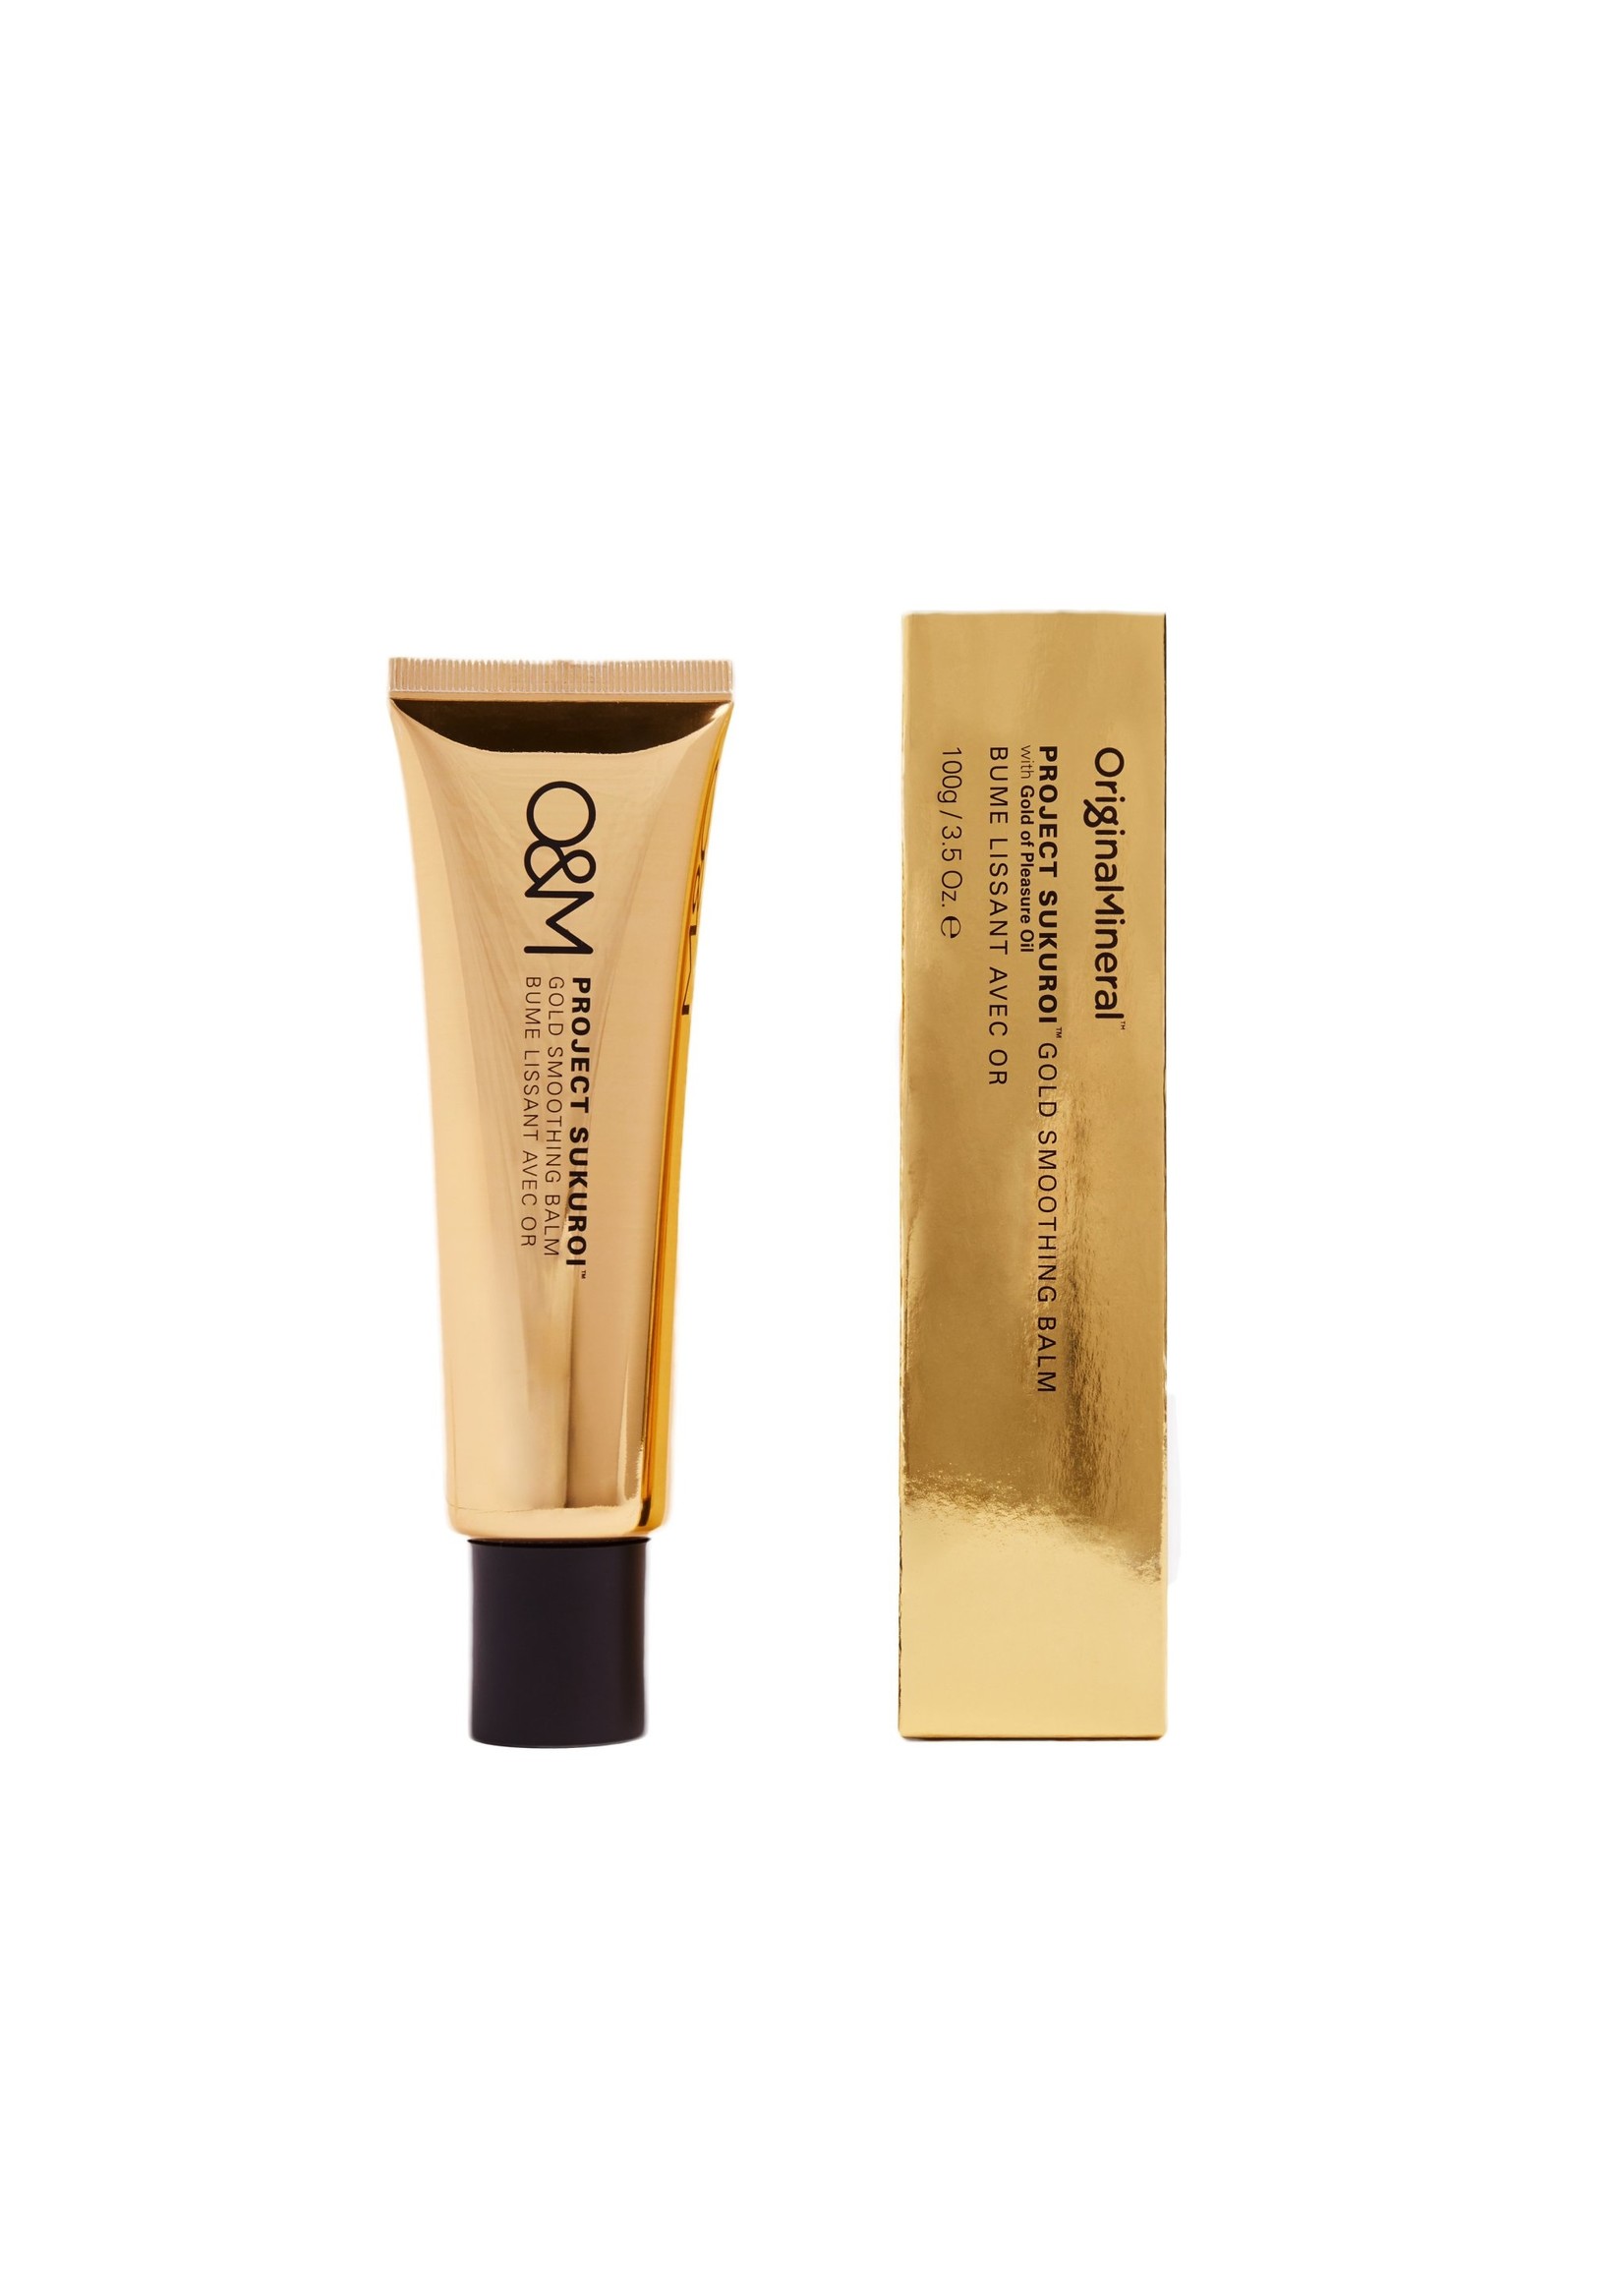 Original & Mineral O&M Project Sukuroi Gold Smoothing Balm 100g